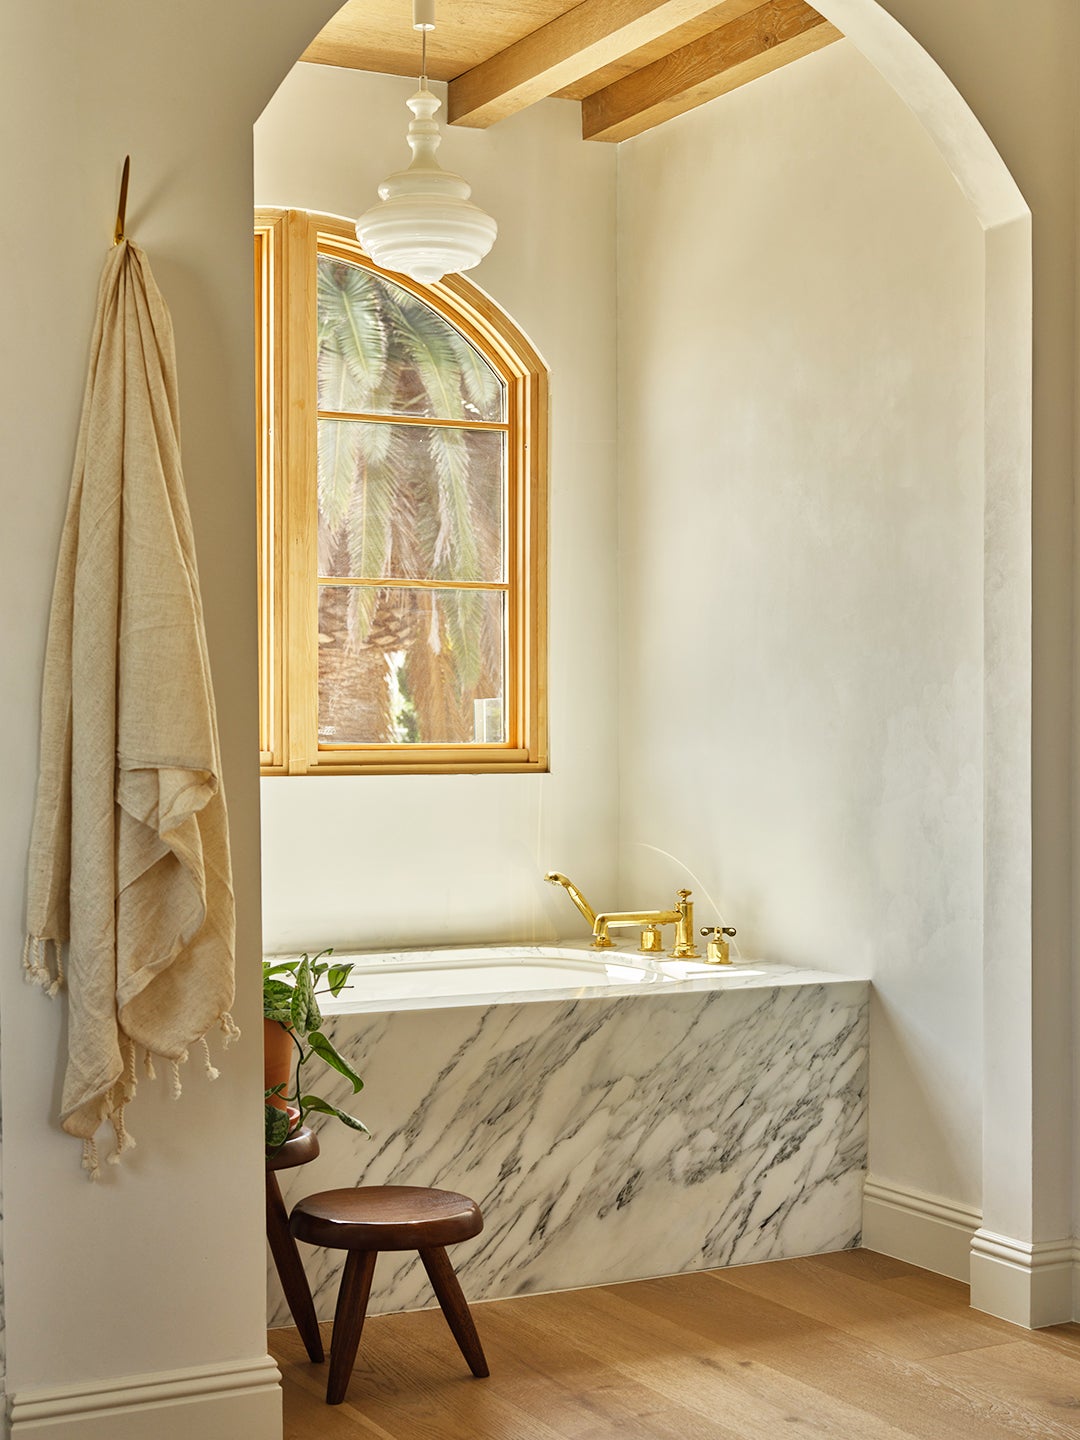 marble tub tucked under arch